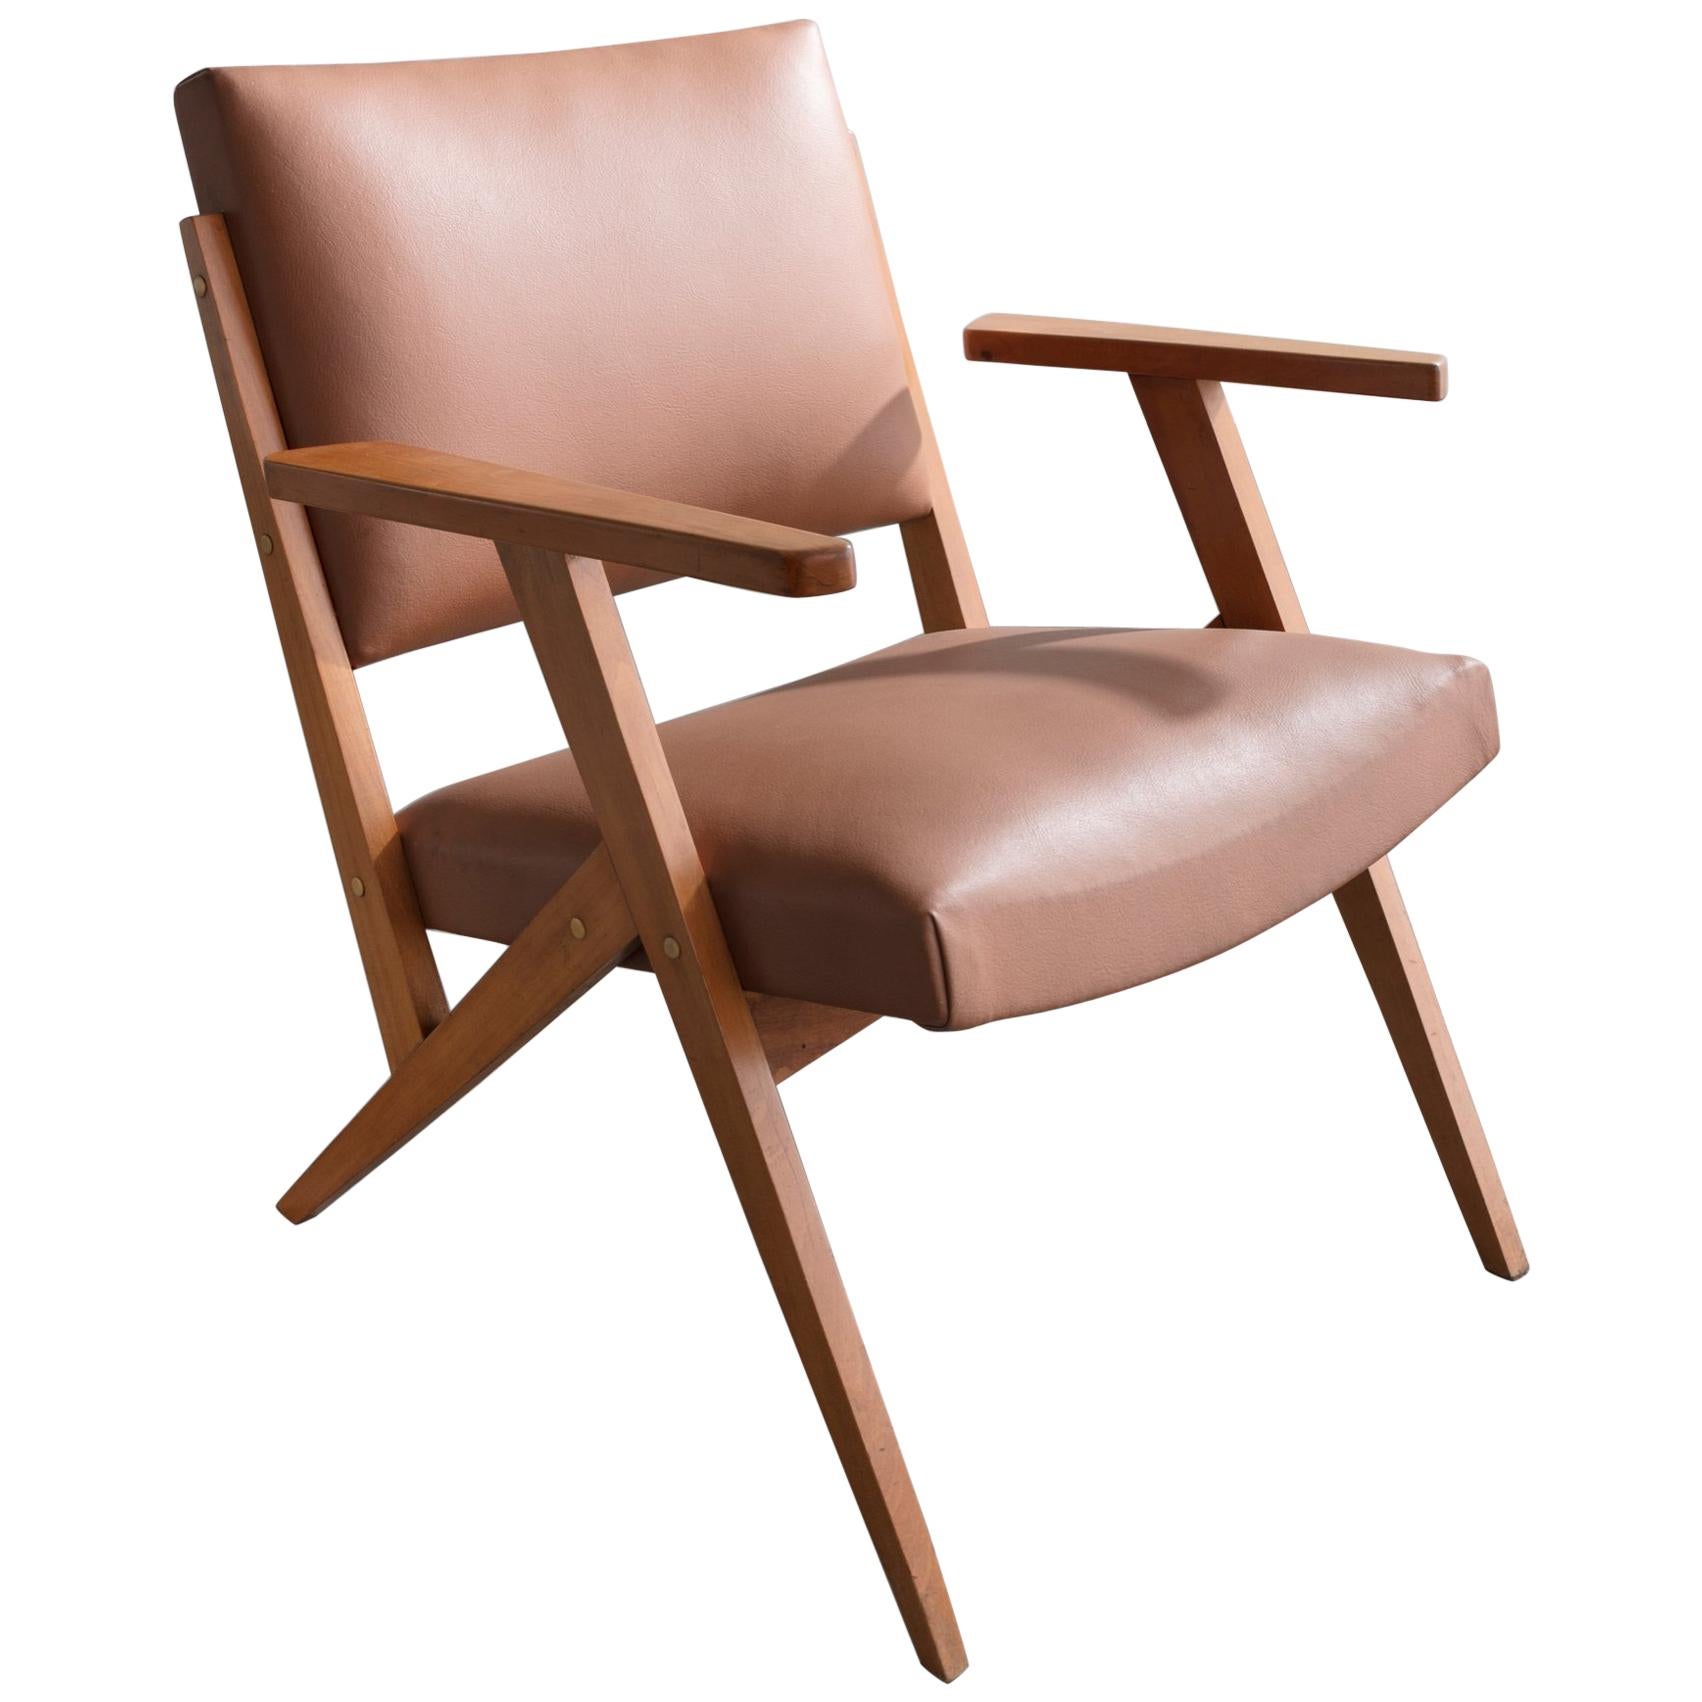 Lounge Chair in Caviona Wood and Tan Leather by José Zanine Caldas, 1960s